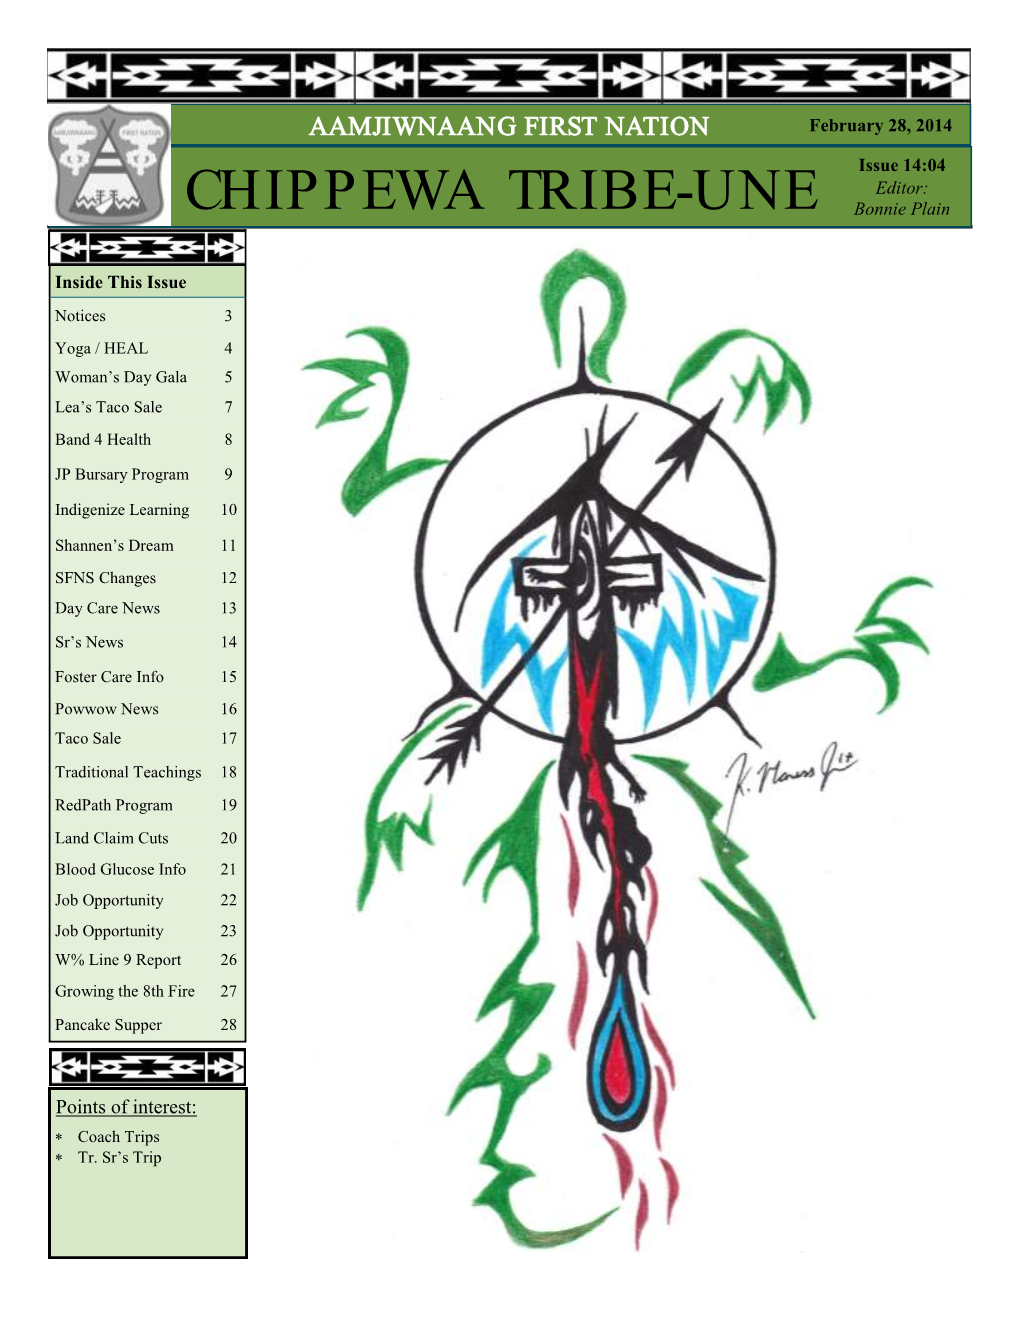 CHIPPEWA TRIBE-UNE Issue 14:04